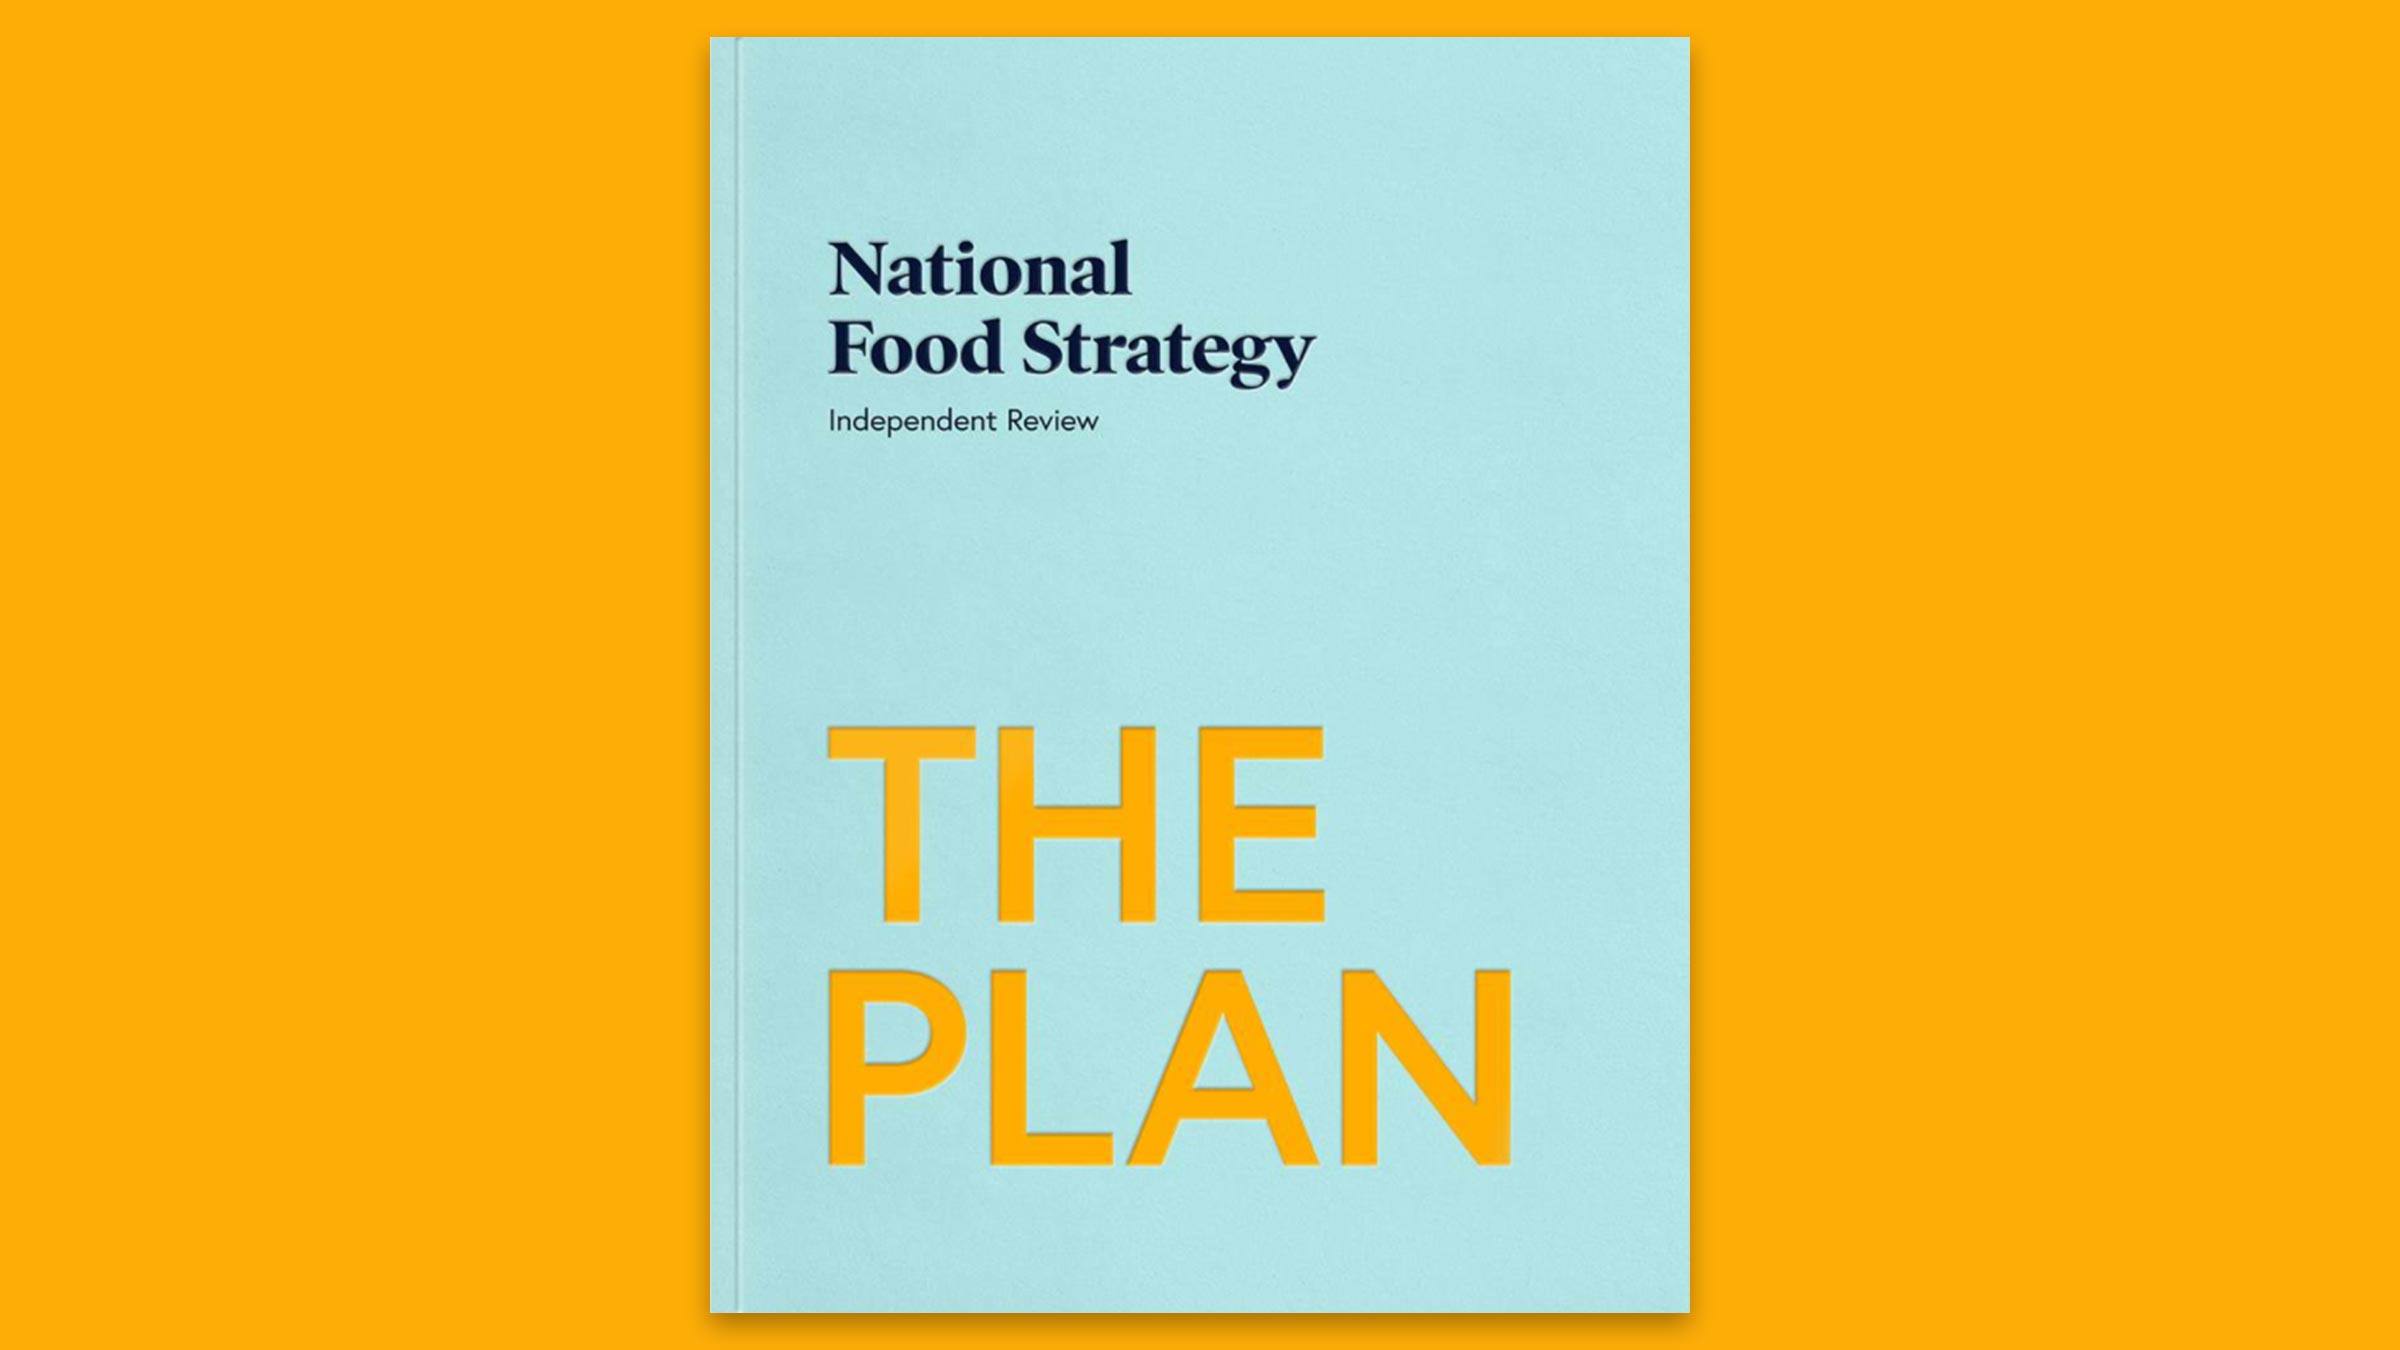 Latest National Food Strategy report, The Plan